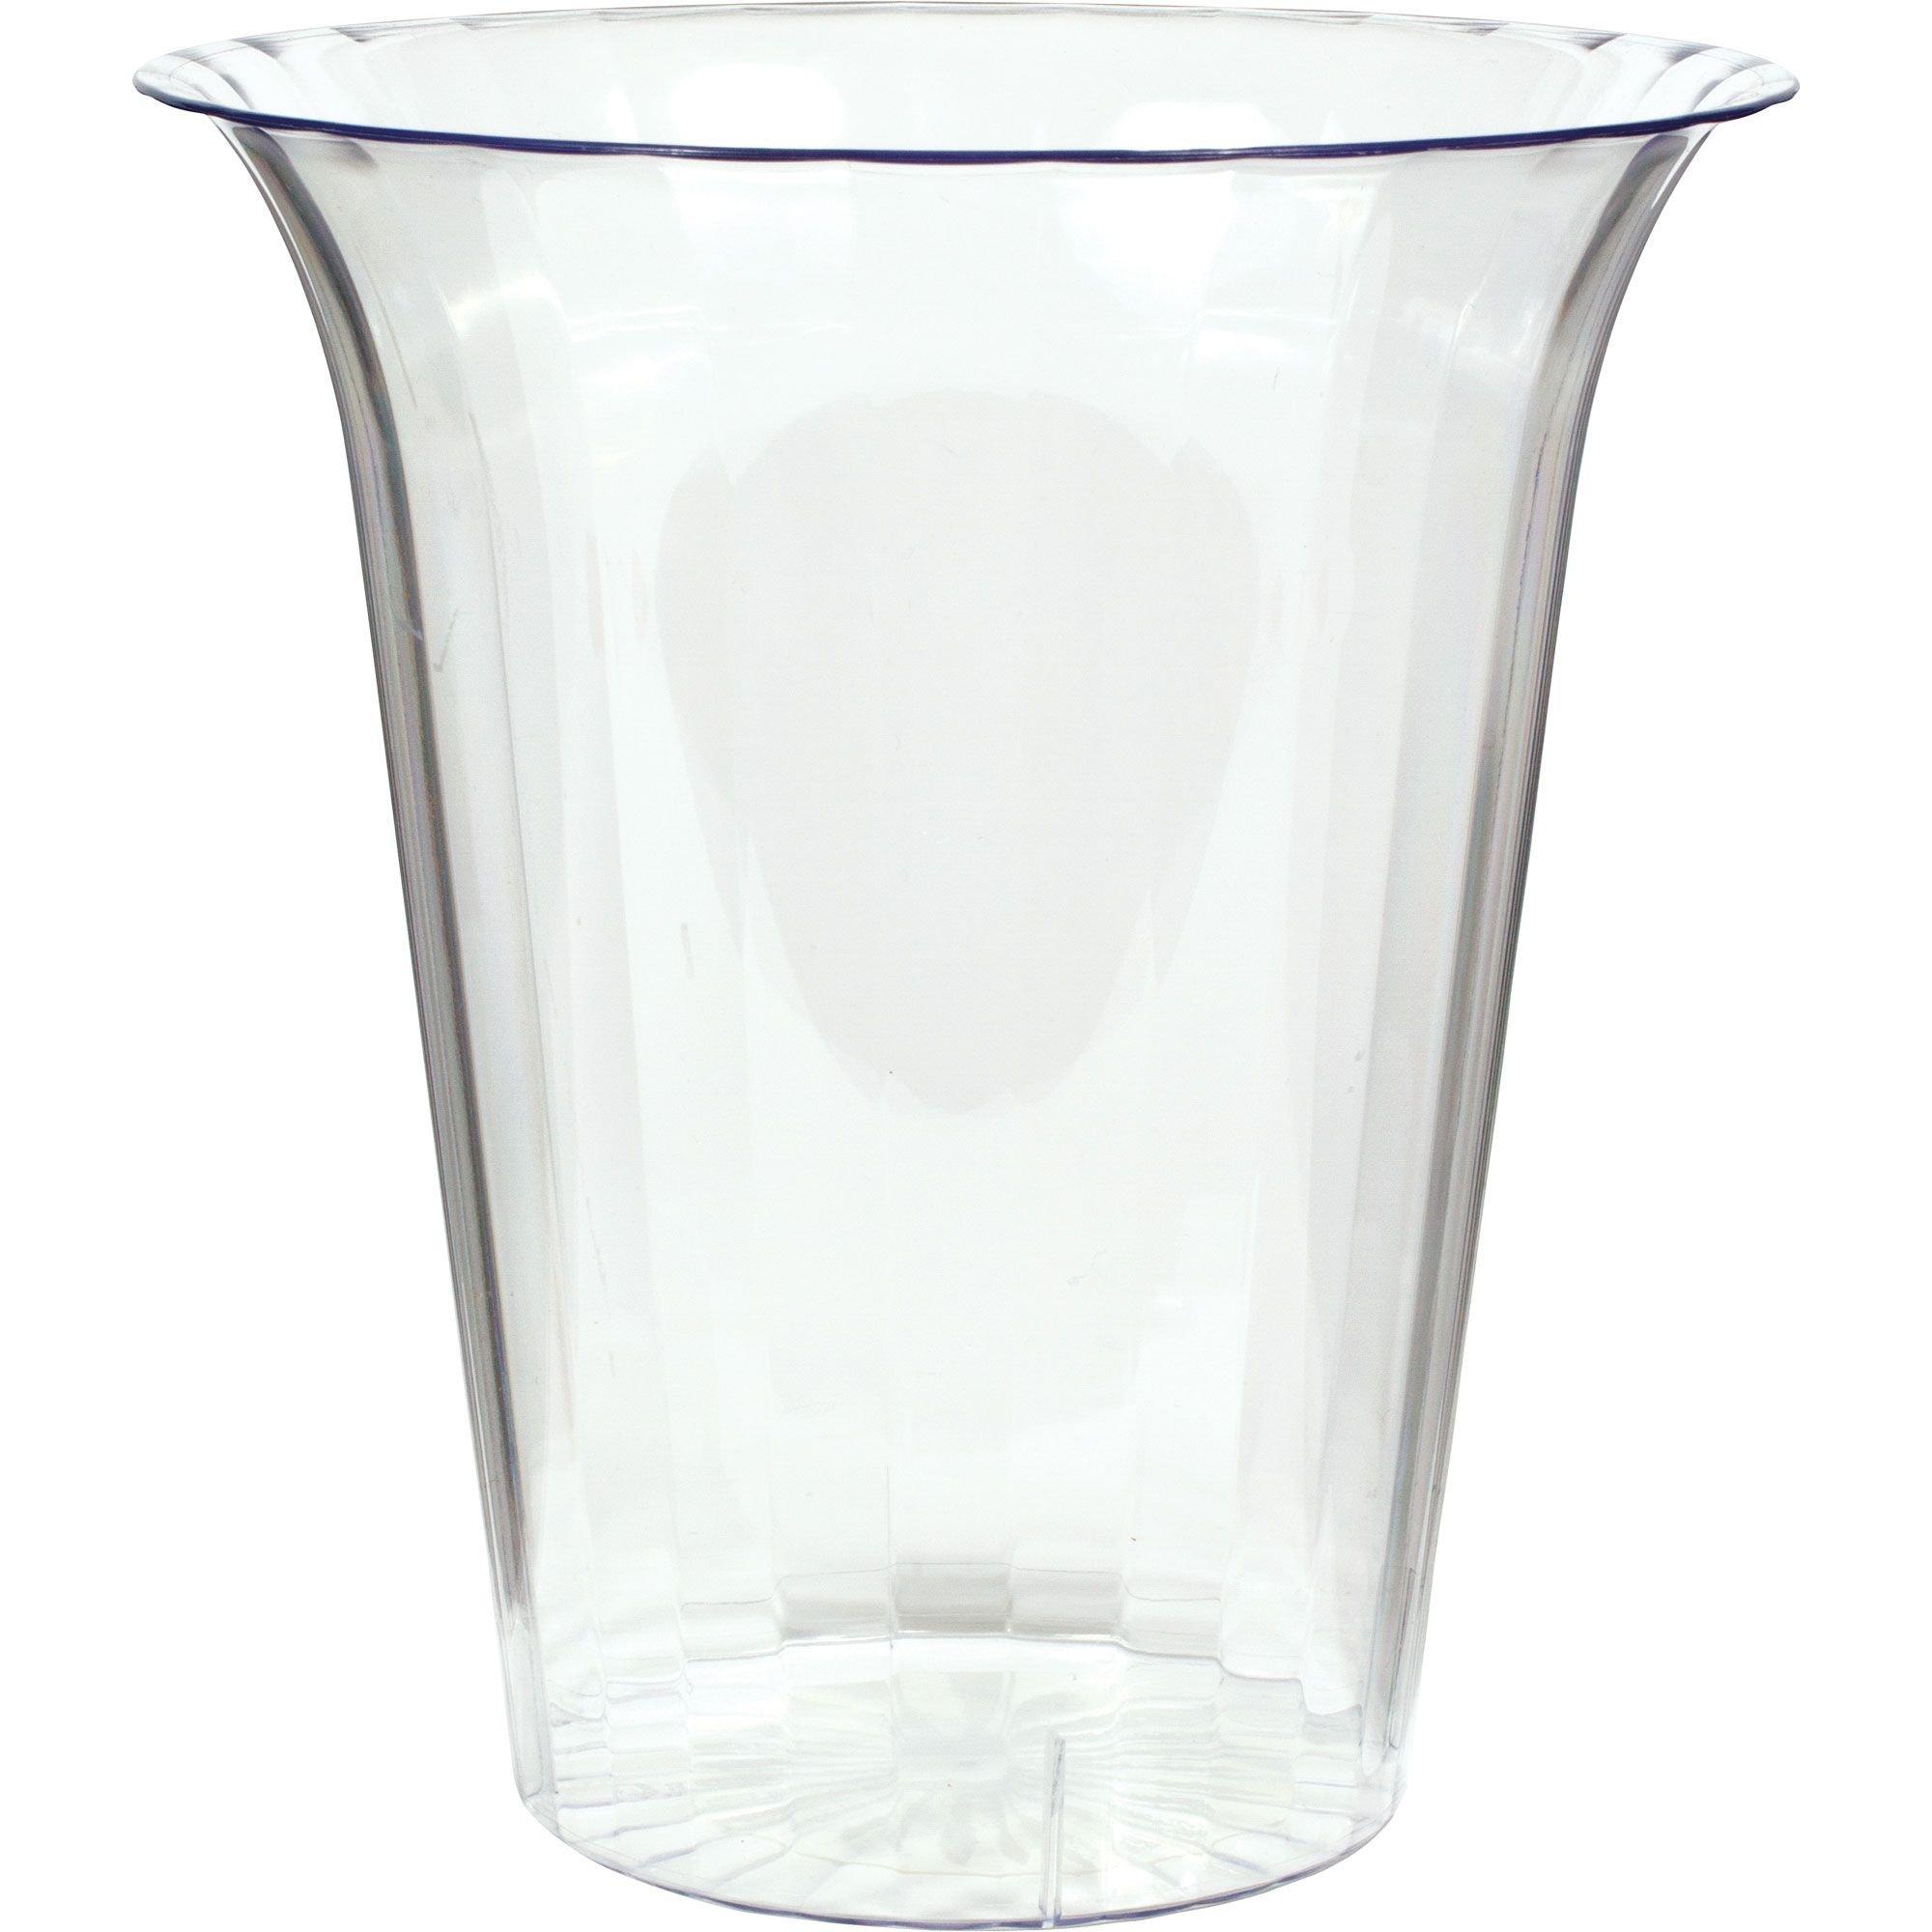 Amscan Clear Plastic Cylindrical Candy Container, L